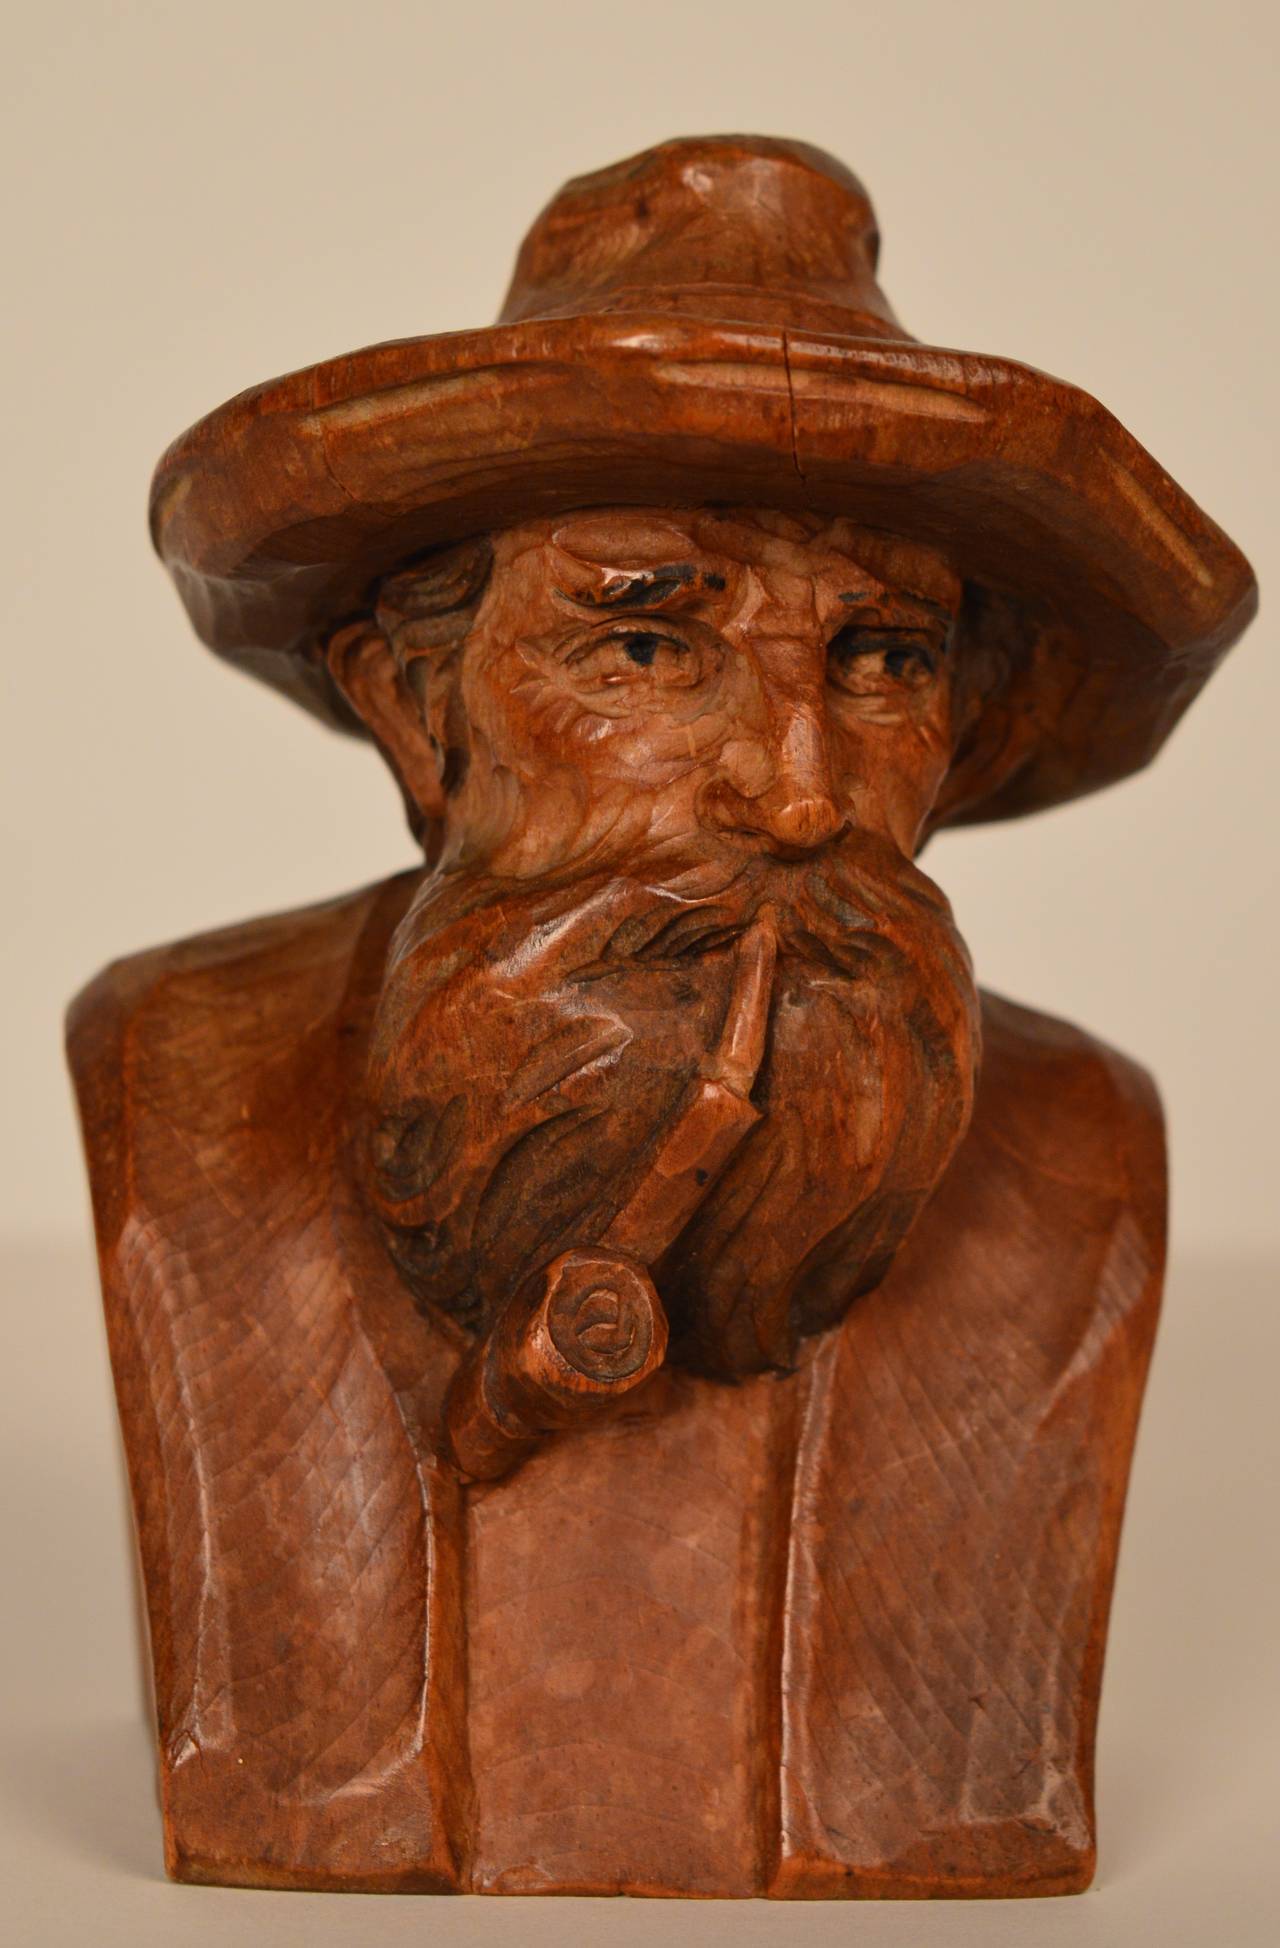 A carved wood (pine) bust of a old man.
The skill of the sculpter projects the wisdom and peace of this elderly man. Excellent condition and a warm carmel patina add to the feeling the carving projects. 
Purchased from a Belgian estate and